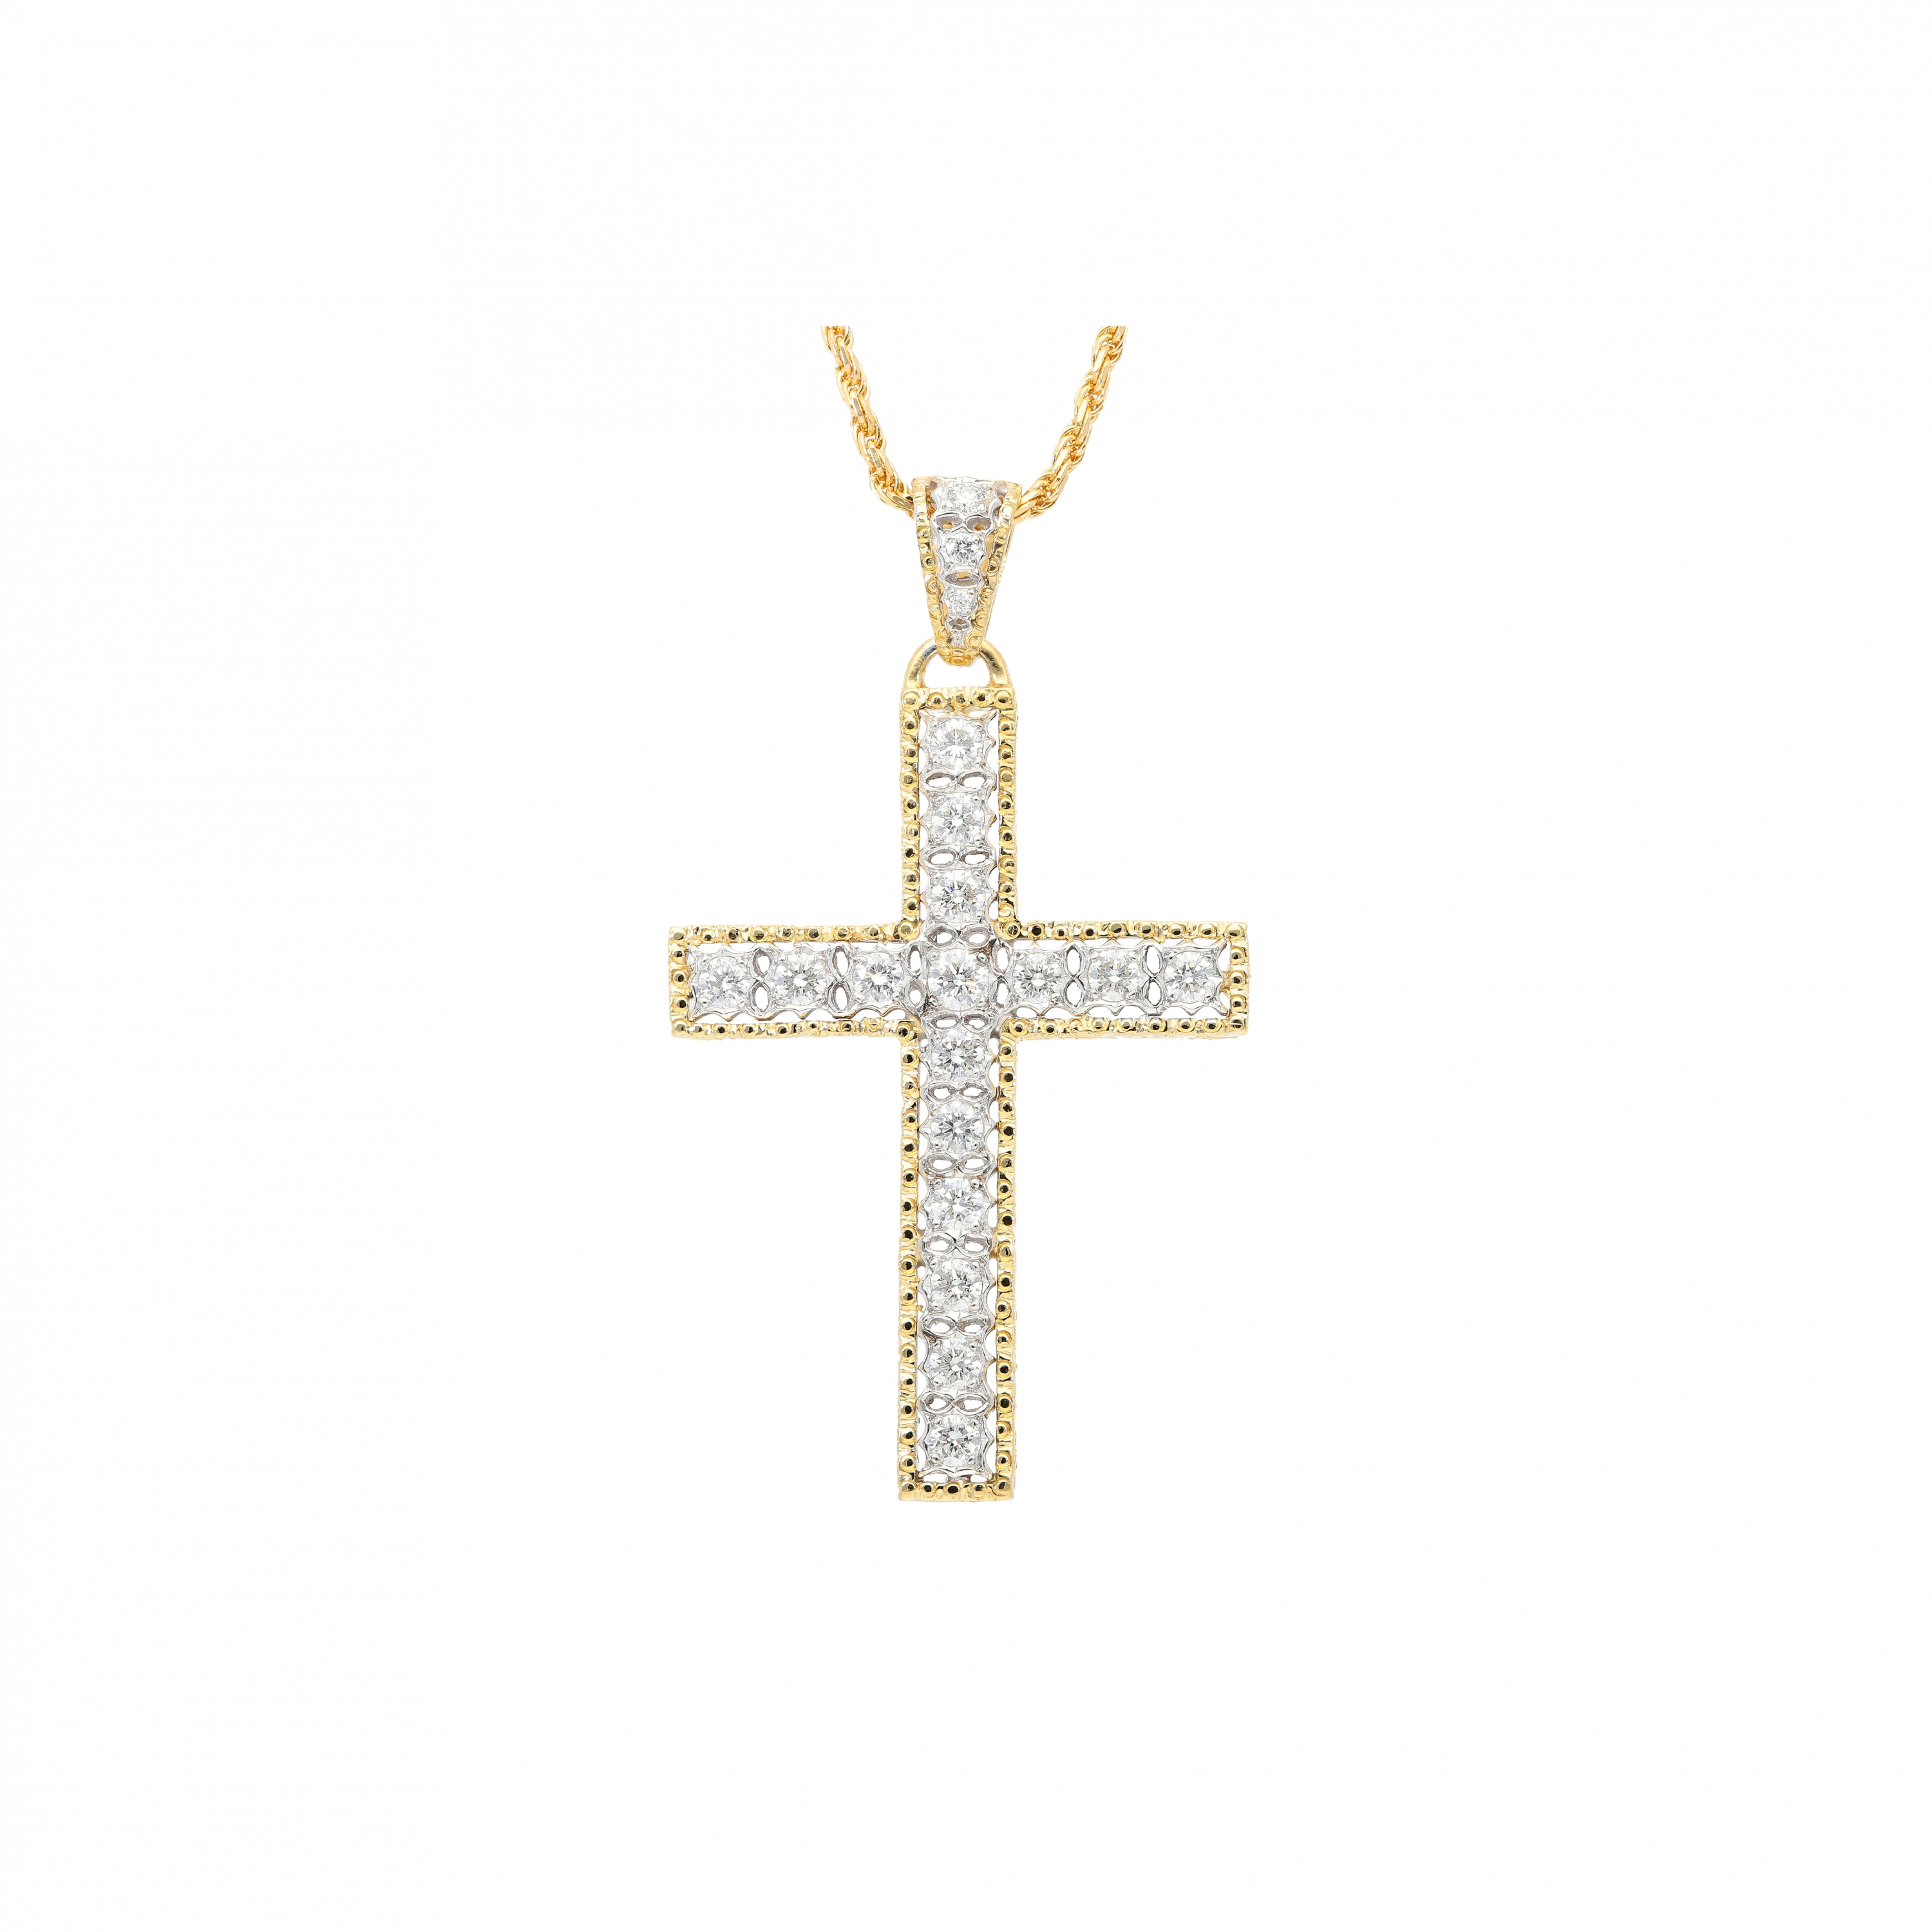 Florentine renaissance inspired cross necklace in 18kt gold and diamonds